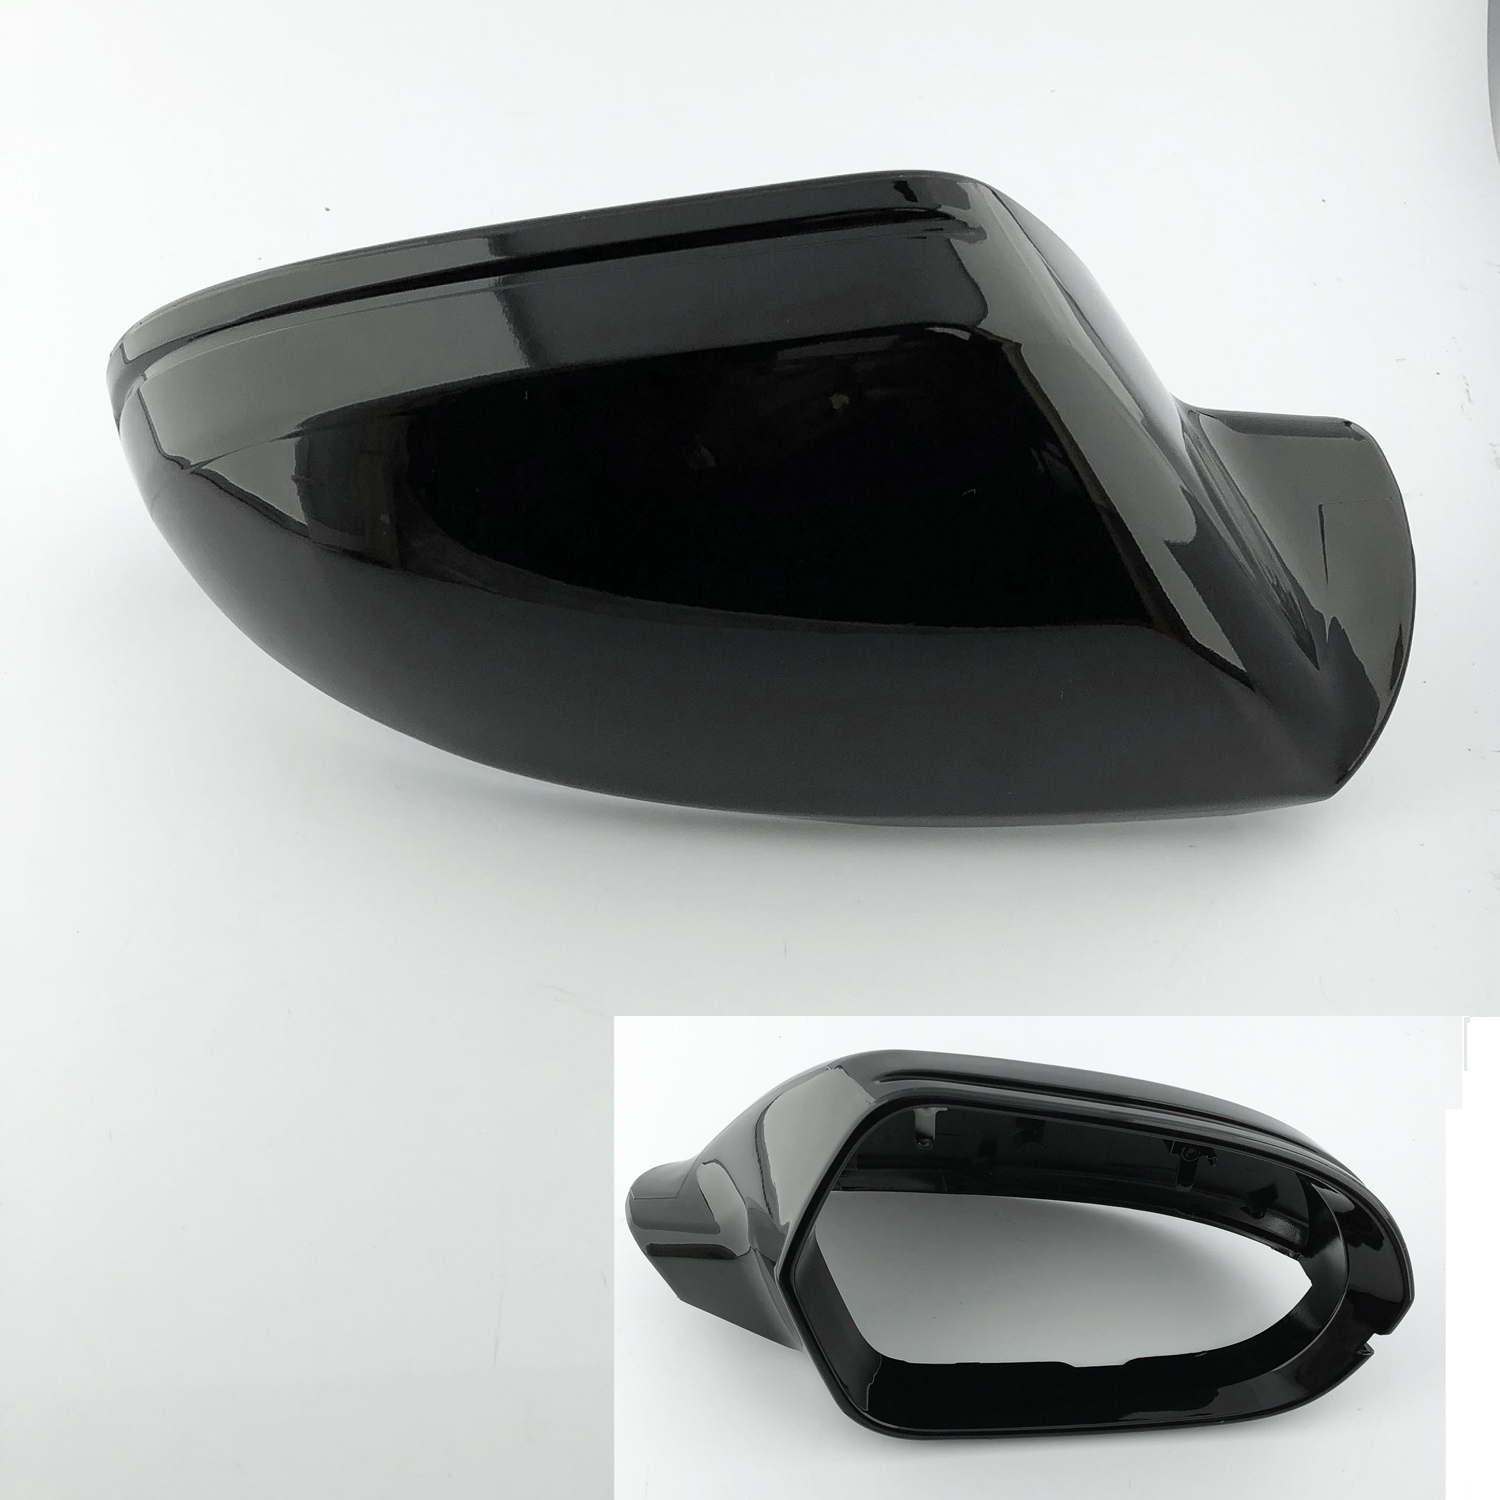 Low Price and High Quality Guarantee on audi a6 Driver Side Passenger Side Wing Mirror Replacements